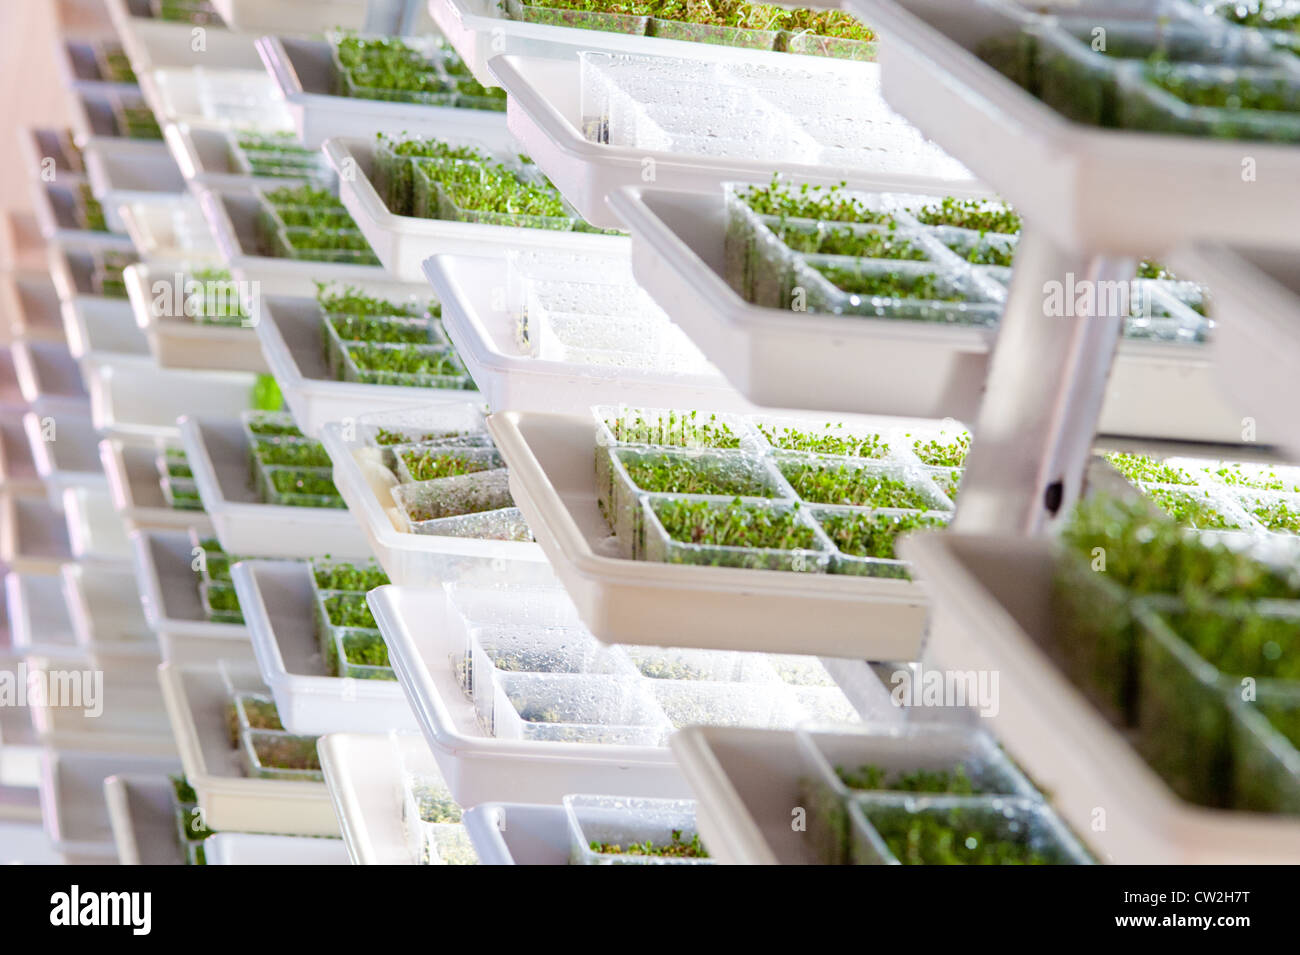 Hydroponically grown sprouts  Stock Photo